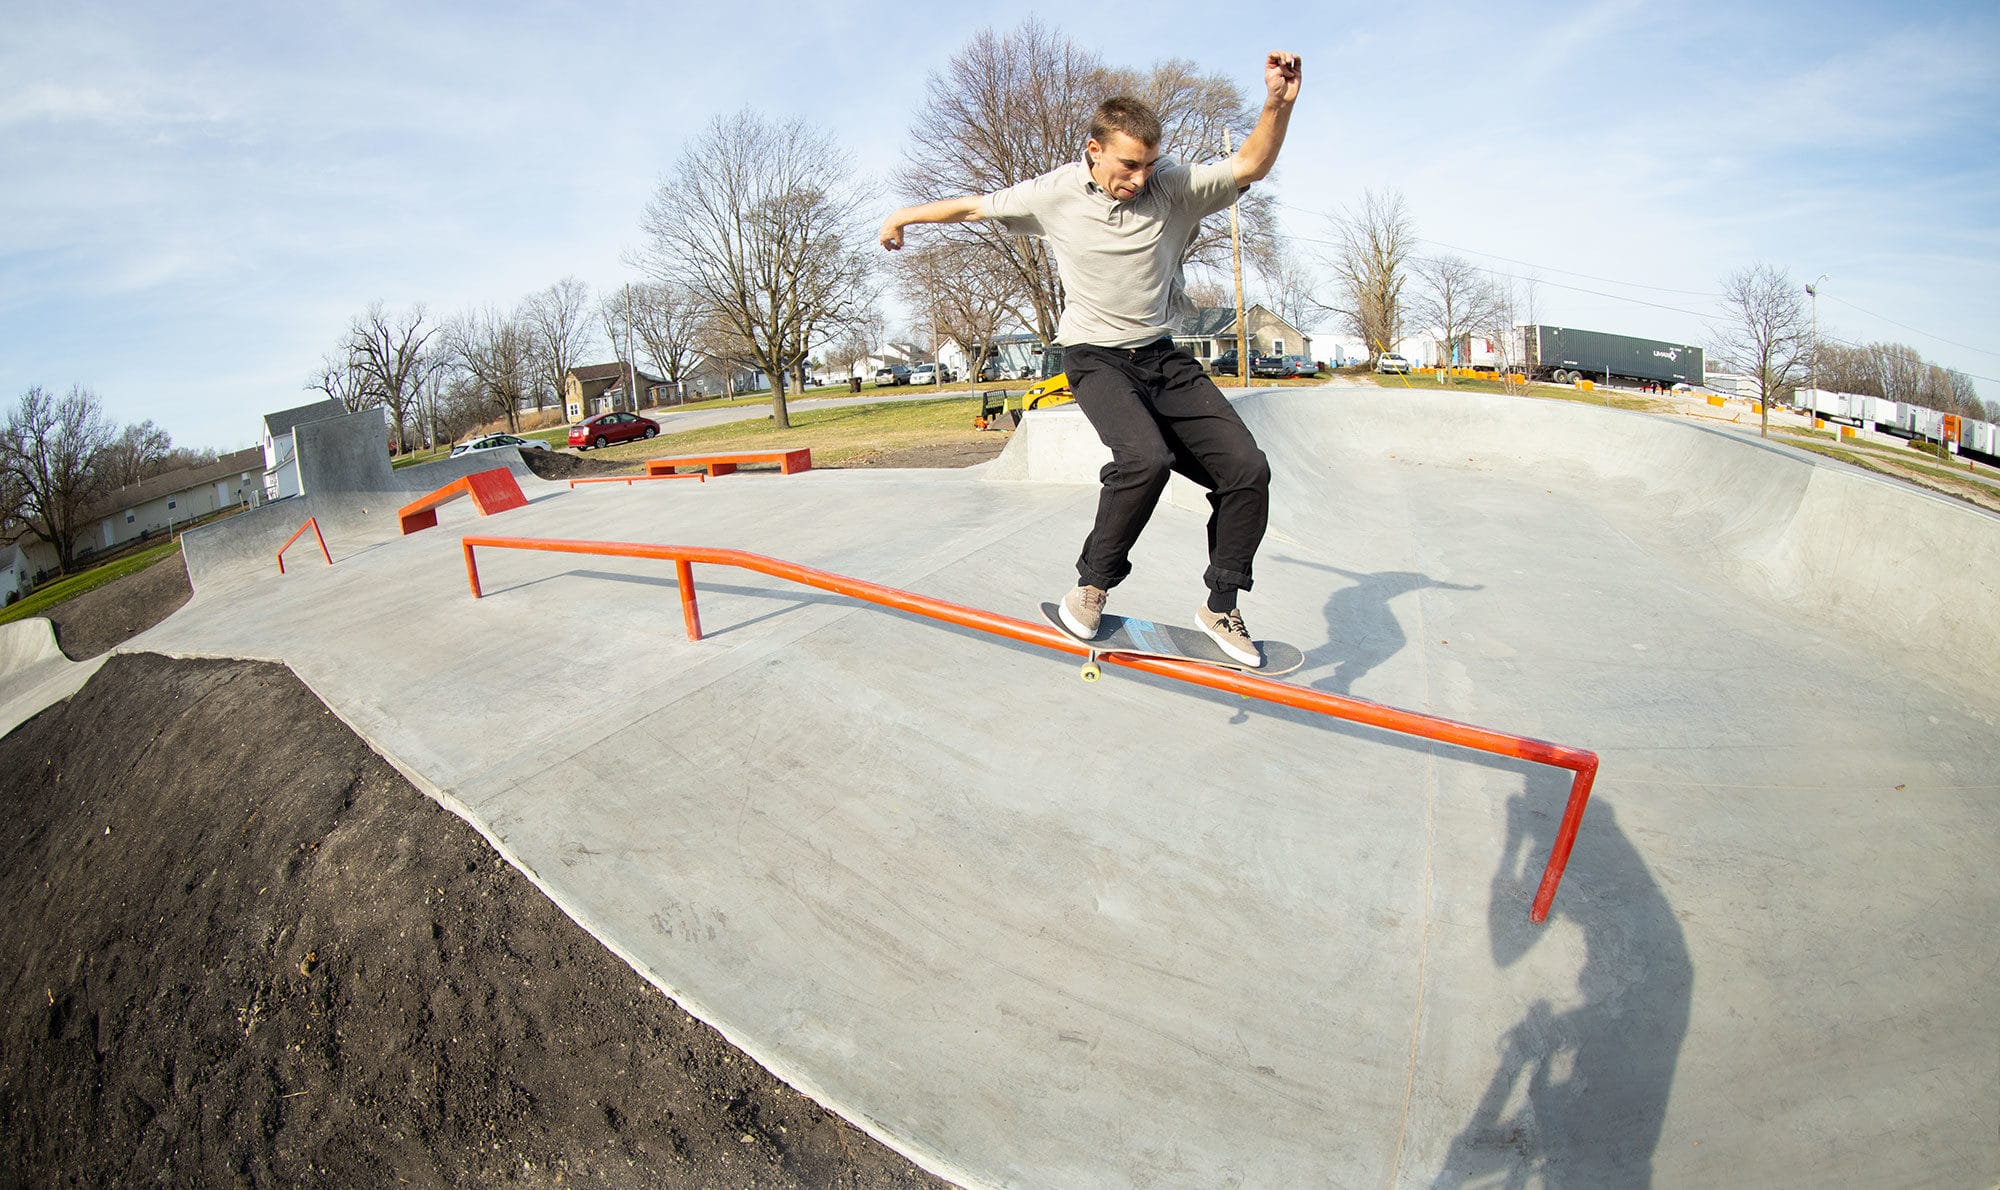 Feeble grind down the orange handrail at the skatepark located in Gibson City, IL